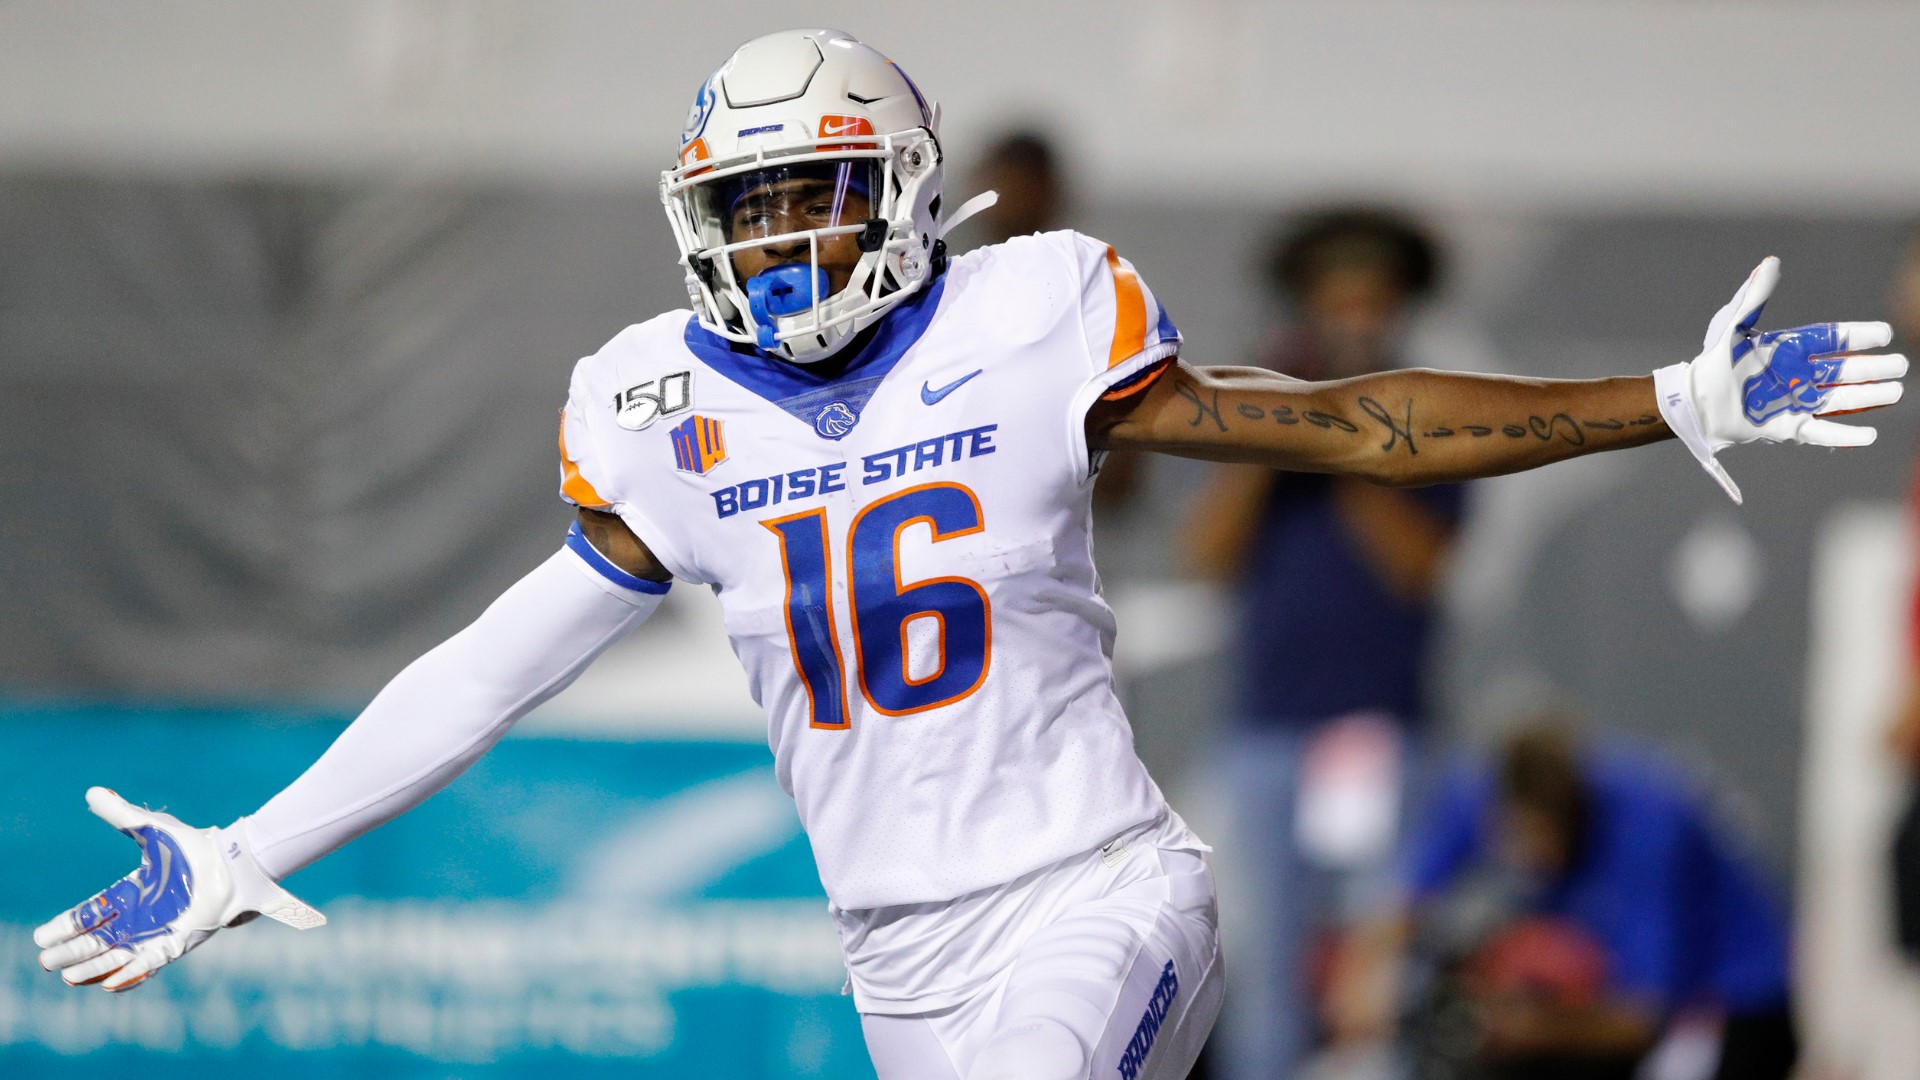 The senior receiver made some clutch plays against UNLV last weekend. Also, the backstory on why Akilian Butler had to doublecheck that his TD actually counted.